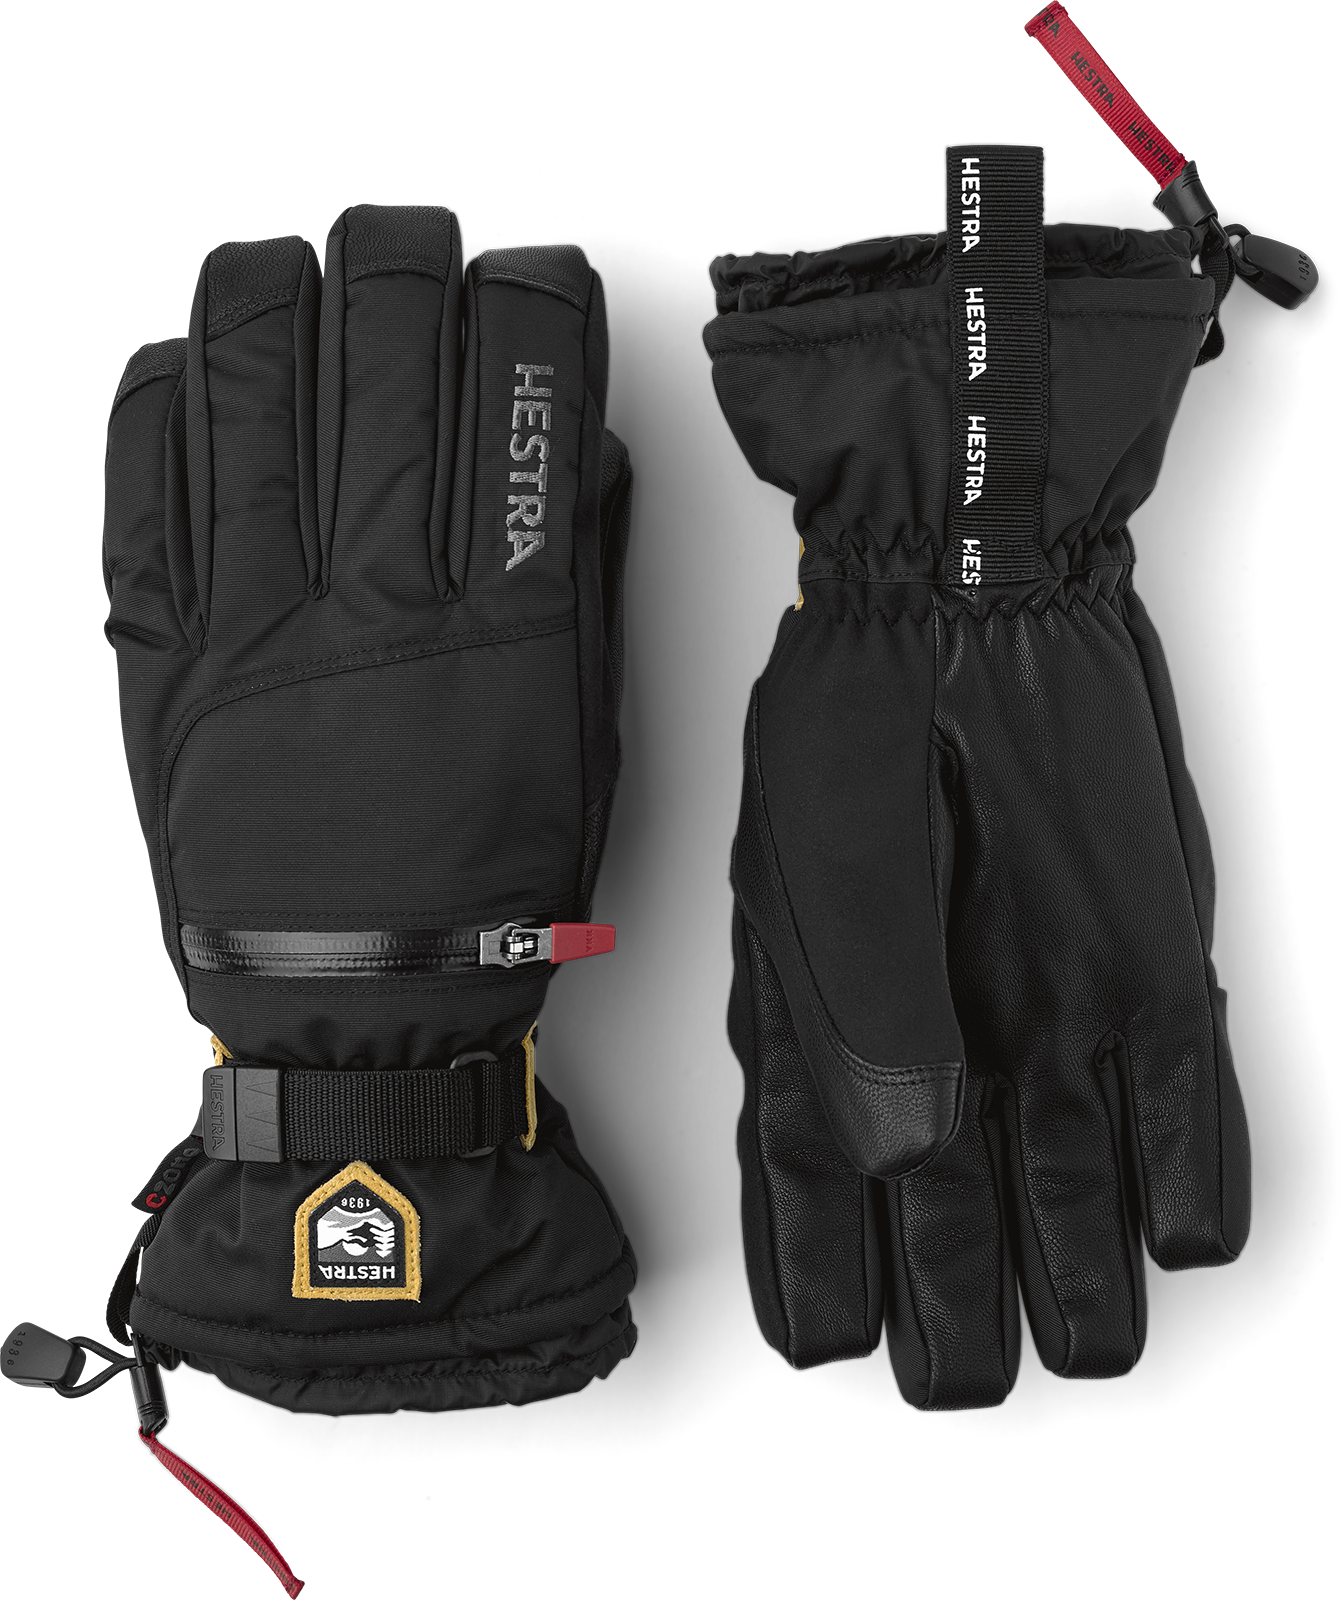 HESTRA Unisex-Adult Mens and Womens Waterproof Ski Gloves All Mountain C-Zone Cold Weather Winter Mittens